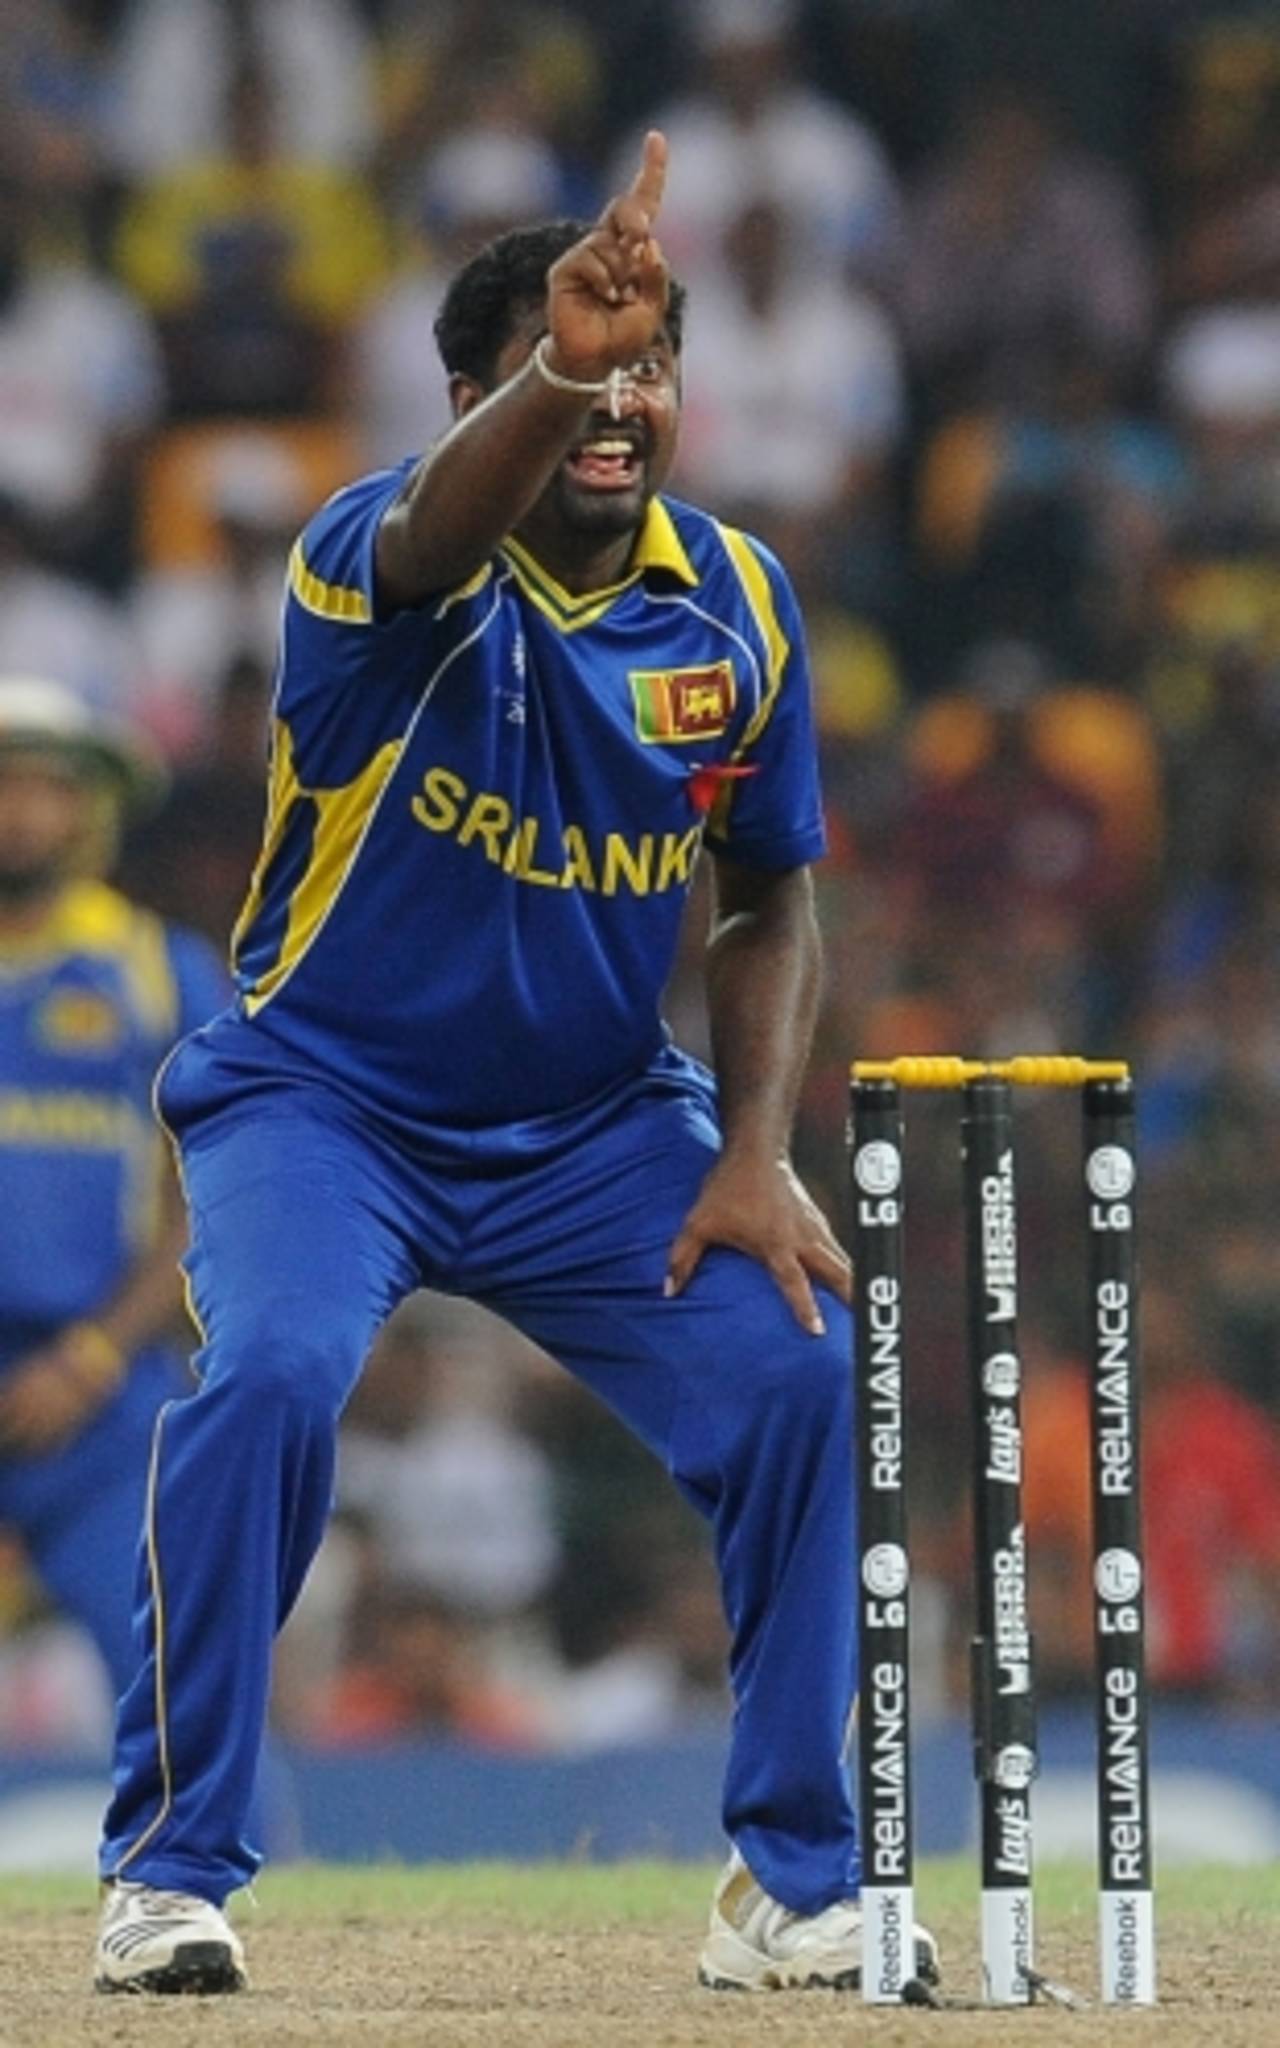 Muttiah Muralitharan removed Scott Styris lbw with his last ball of the match in his final home international, Sri Lanka v New Zealand, 1st semi-final, World Cup 2011, Colombo, March 29, 2011